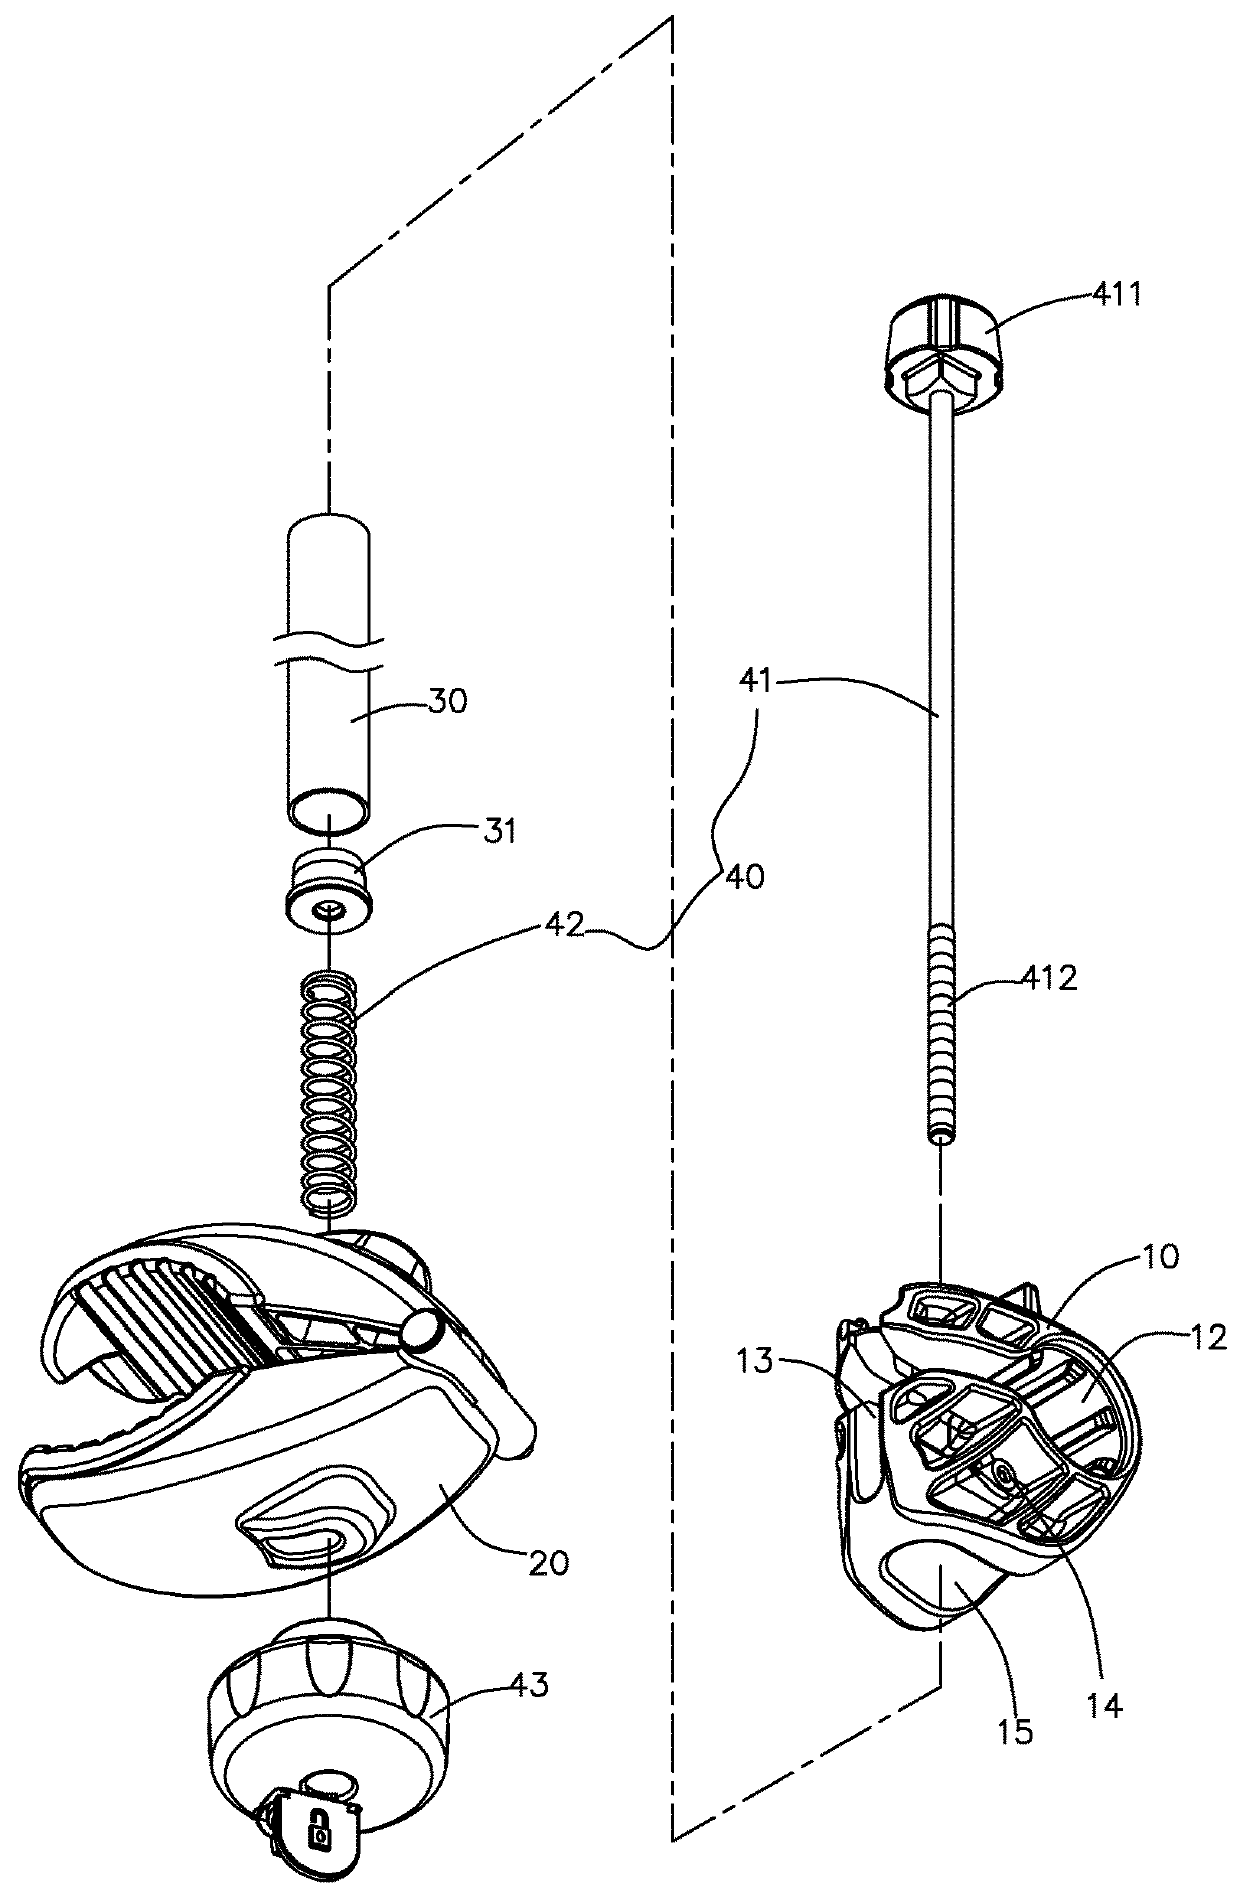 Clamping device for being connected to frame of bicycle carry rack